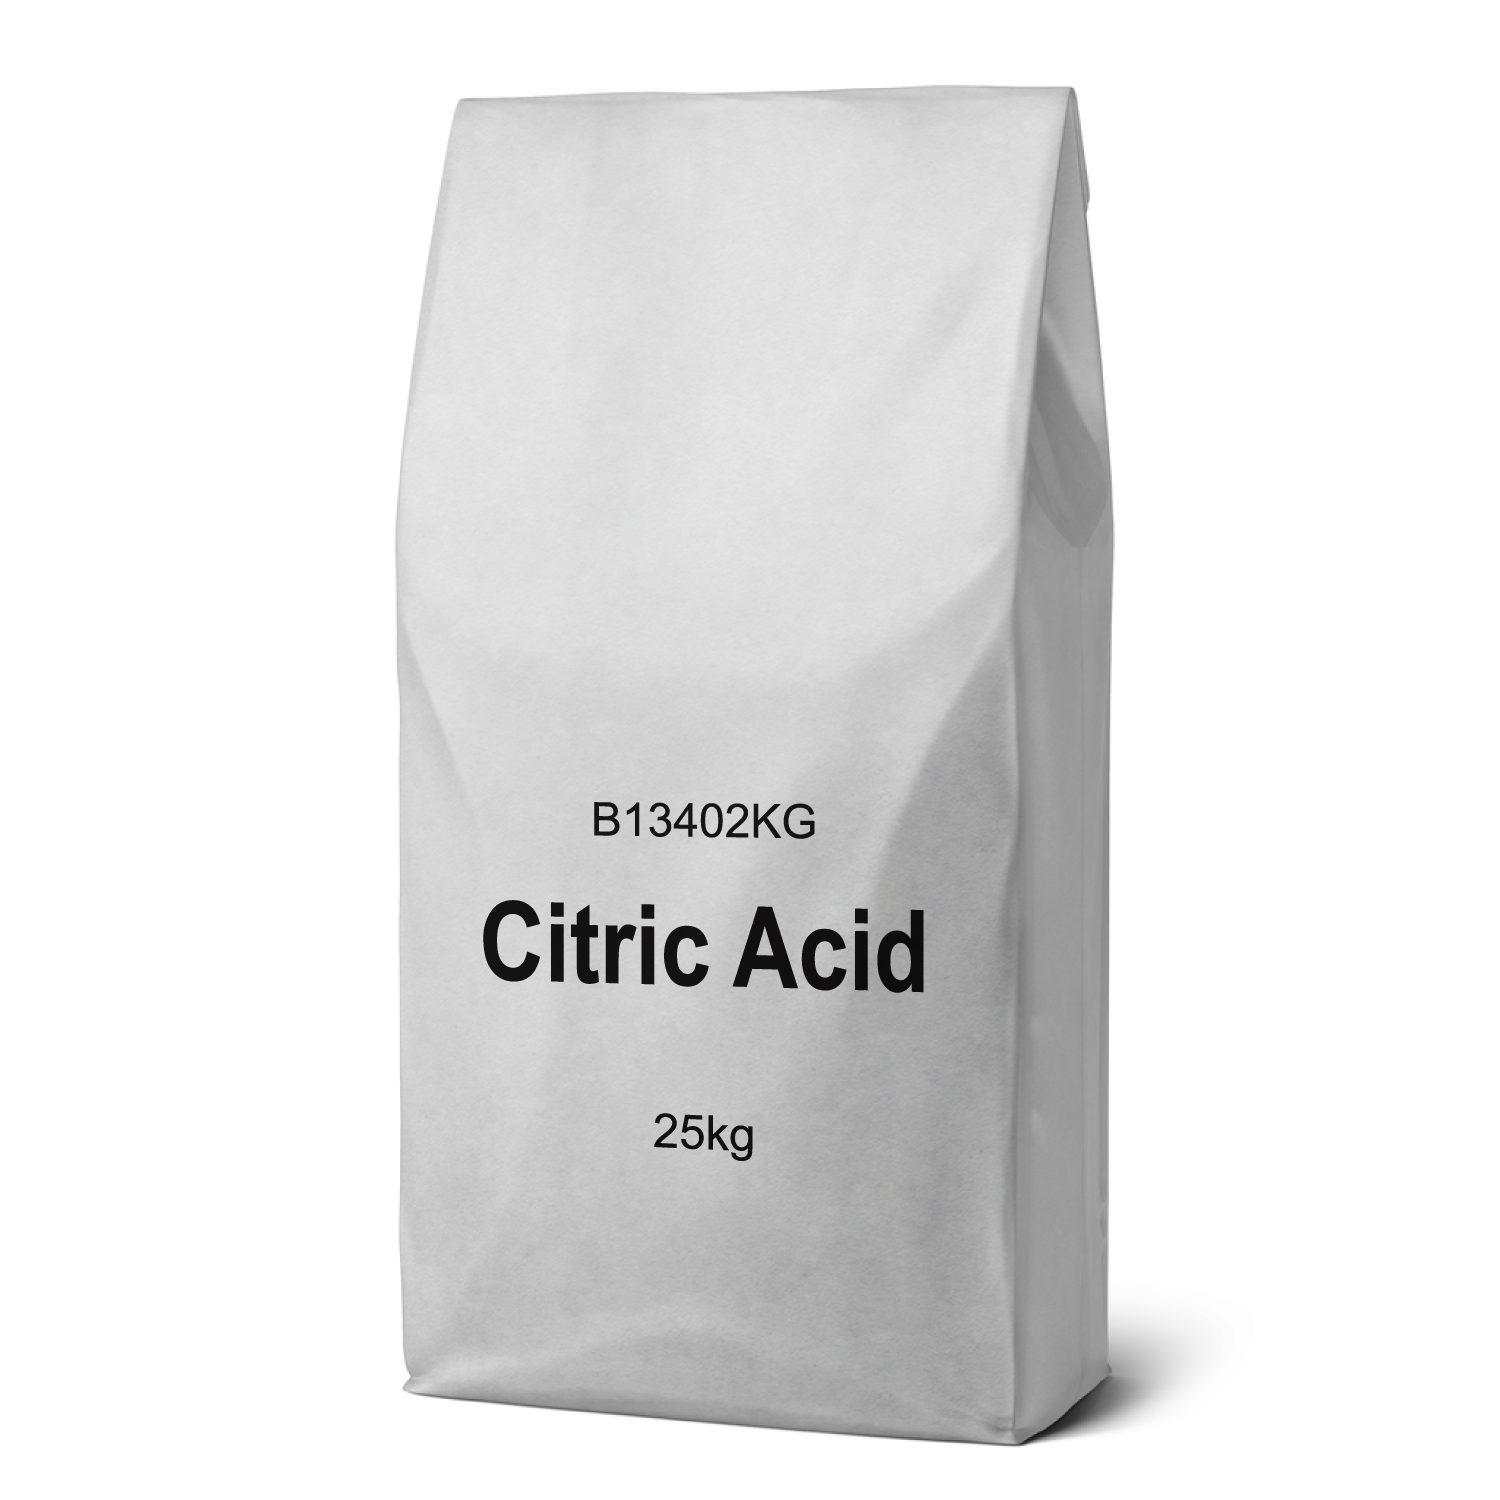 Product image for Citric Acid